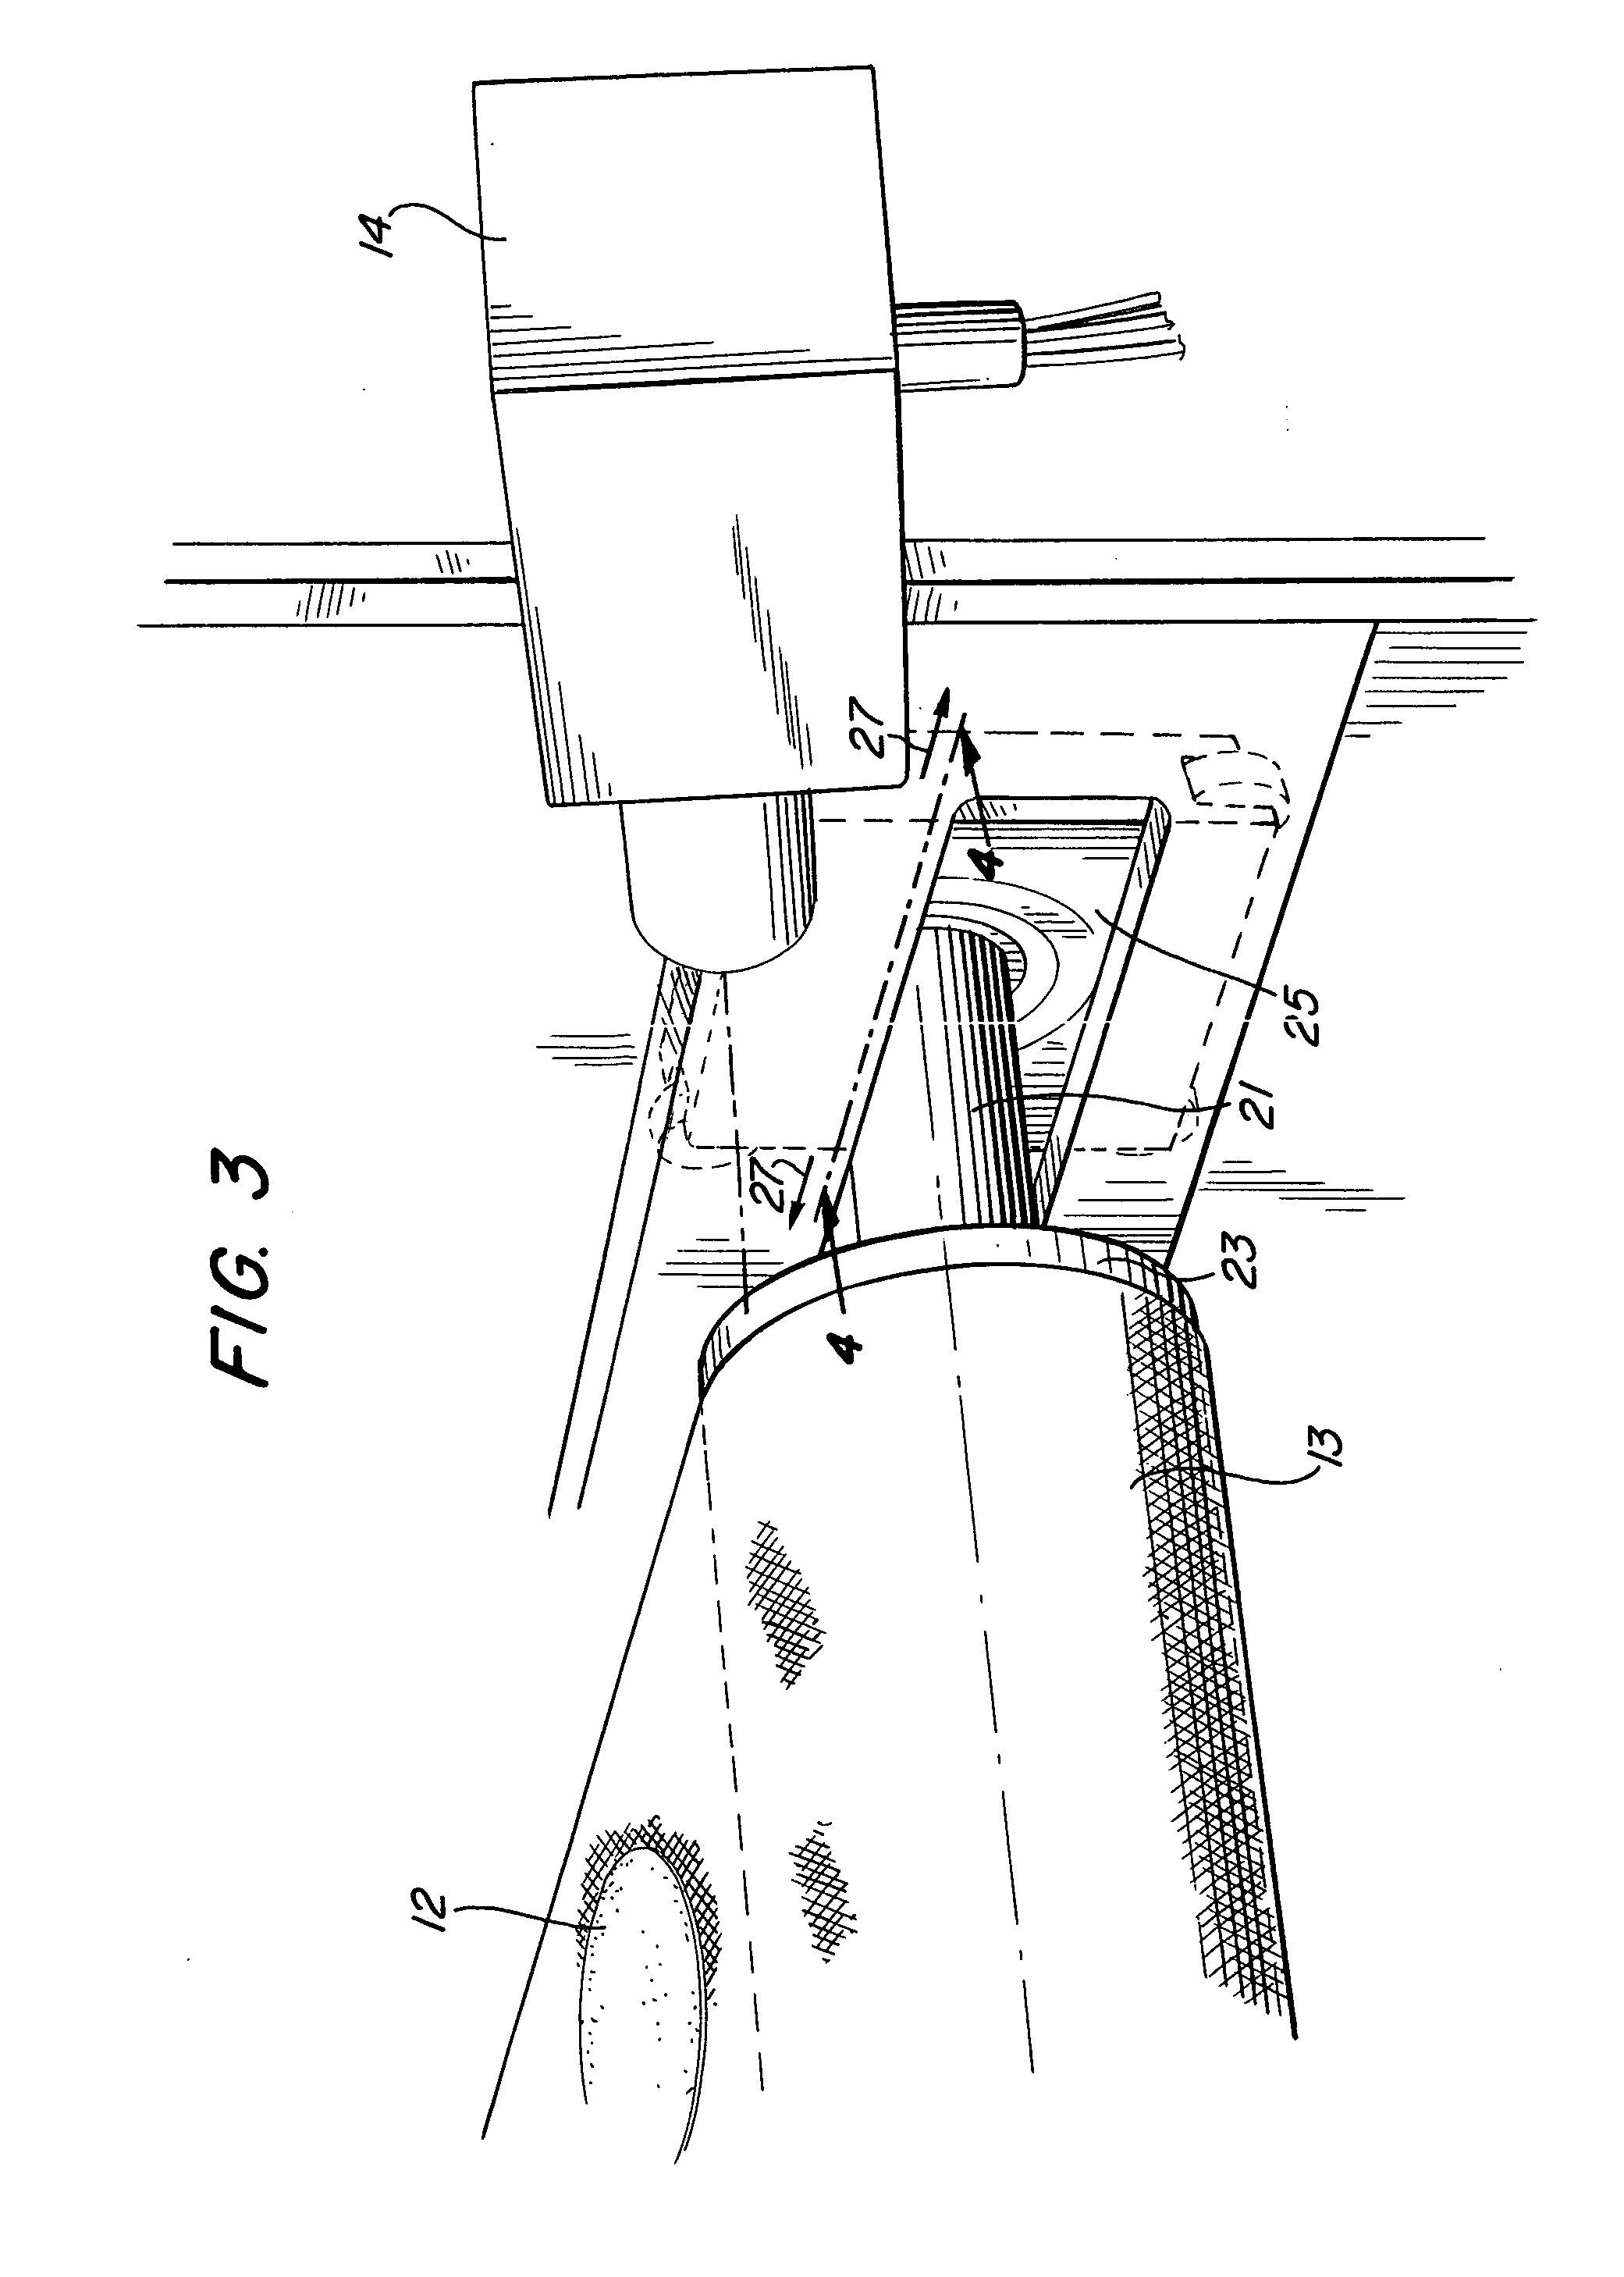 Oven conveyor alignment system apparatus and method